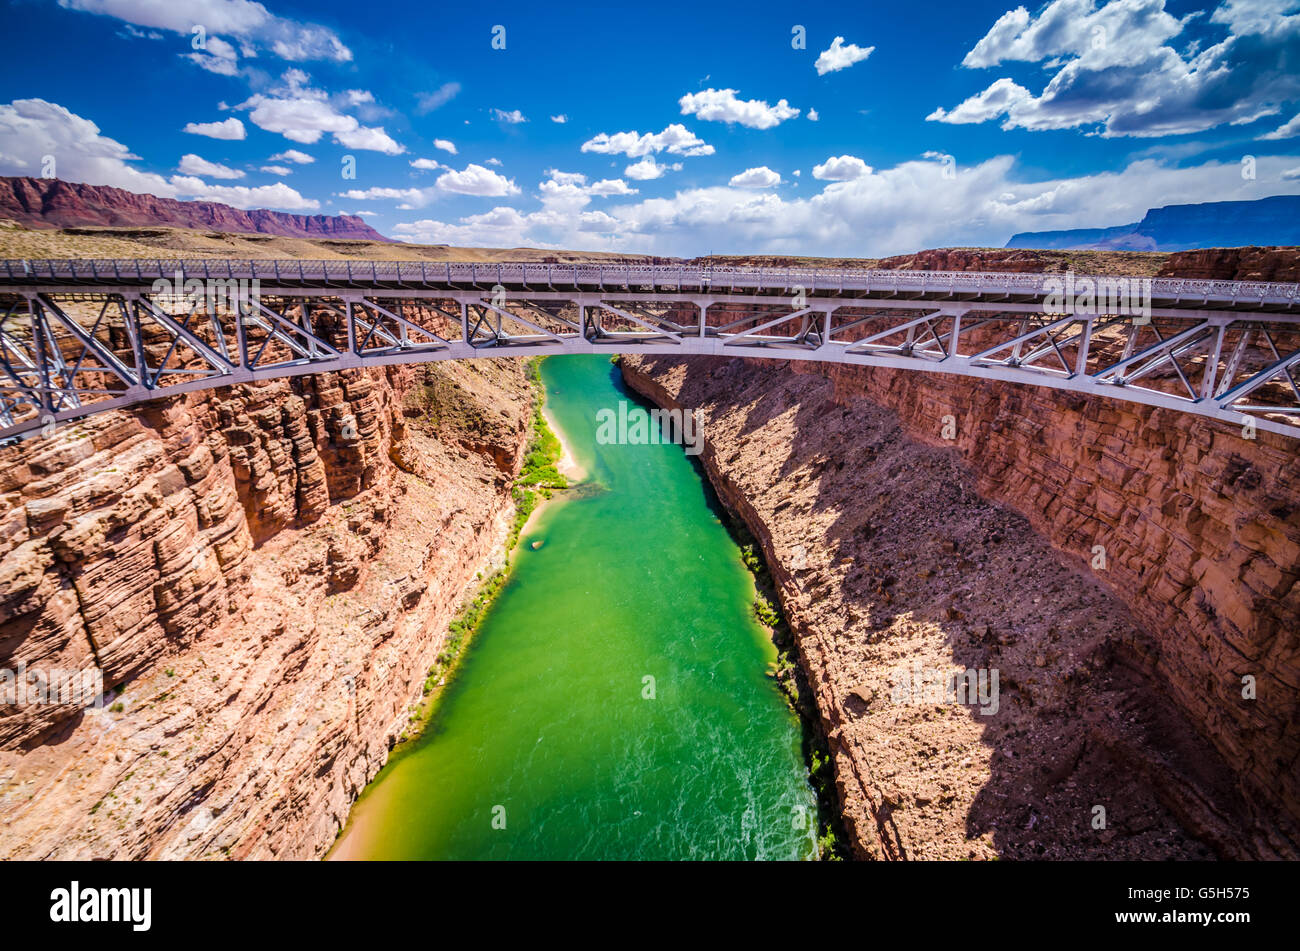 Marble Canyon - Fantastic bridge over the Colorado River in Arizona One of only seven land crossings of the Colorado for 750mi! Stock Photo